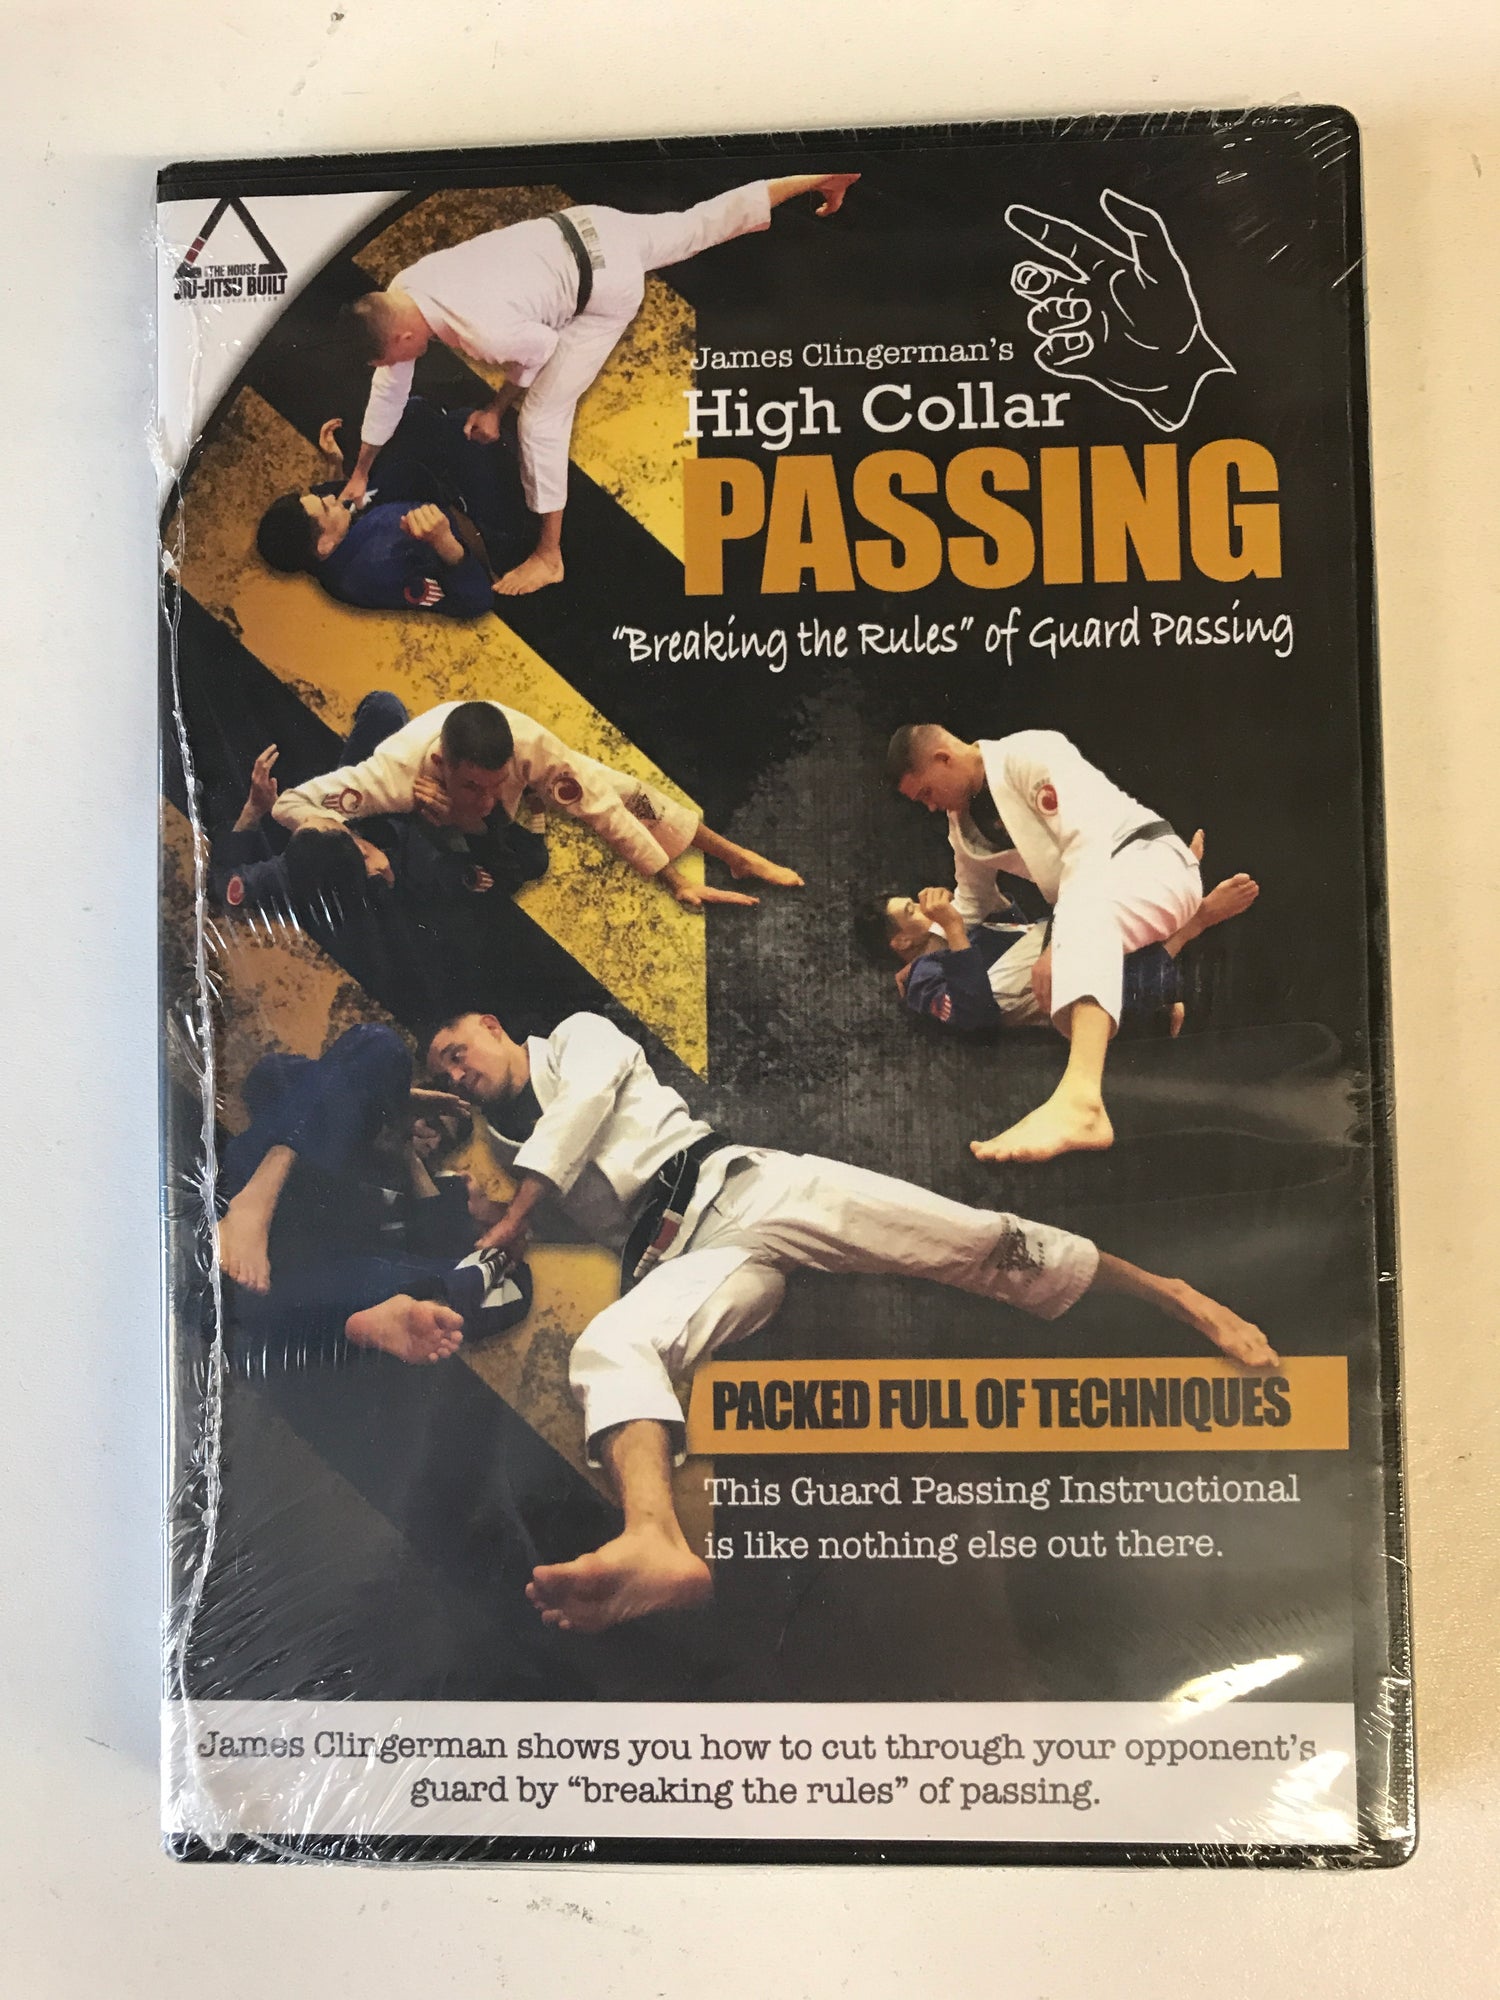 High Collar Passing “Breaking the Rules” of Guard Passing DVD by James Clingerman - Budovideos Inc